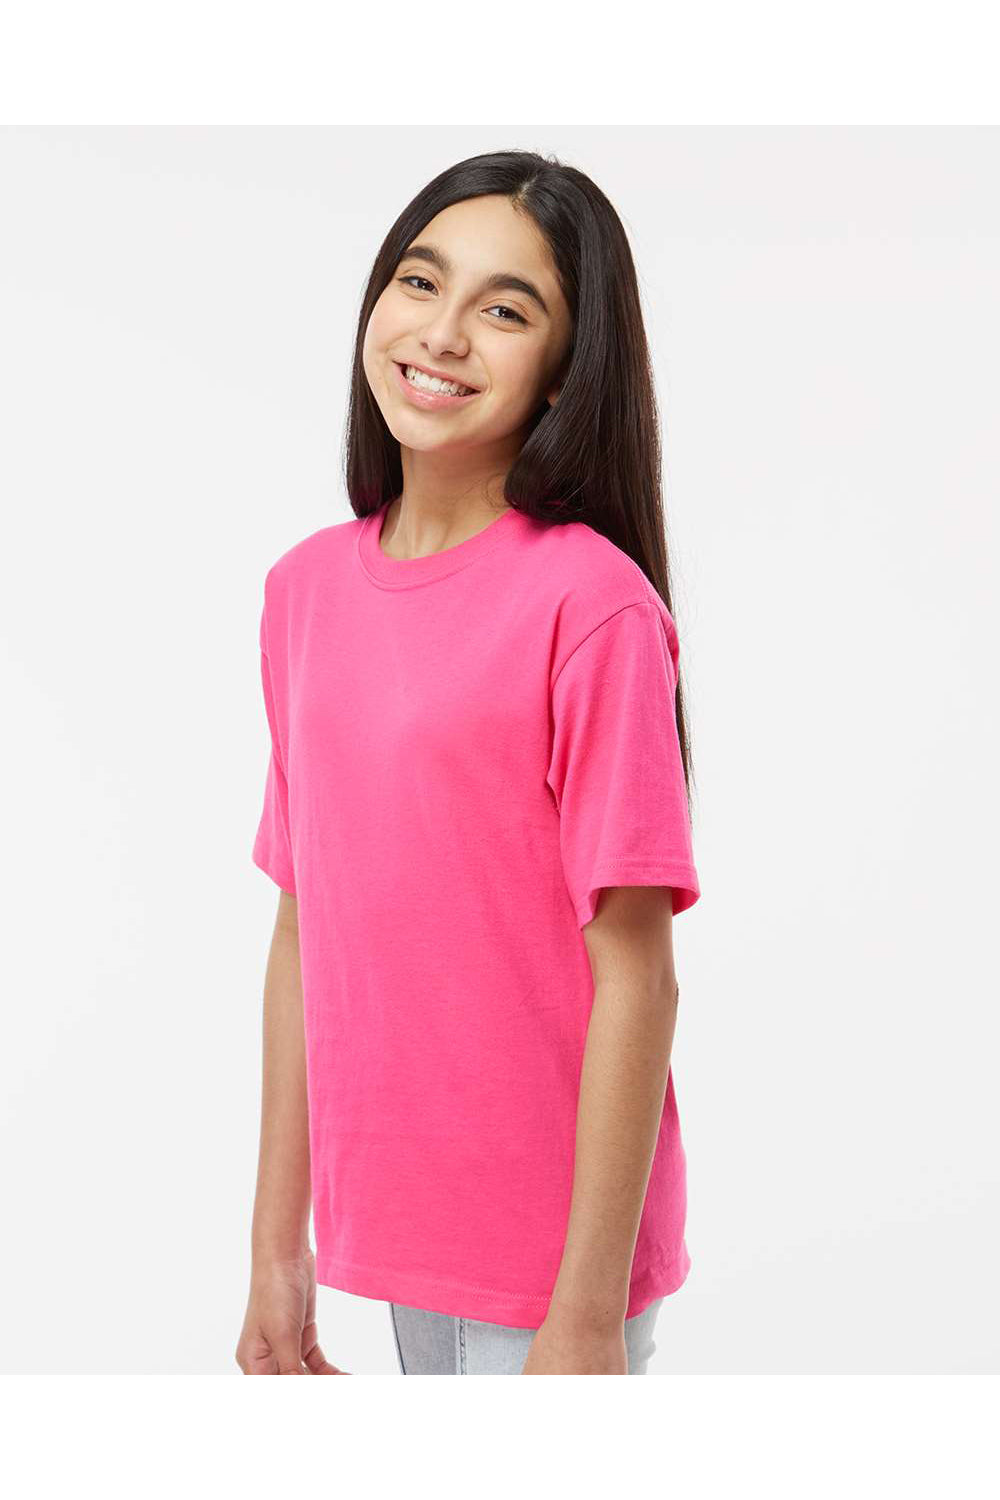 M&O 4850 Youth Gold Soft Touch Short Sleeve Crewneck T-Shirt Heliconia Pink Model Side